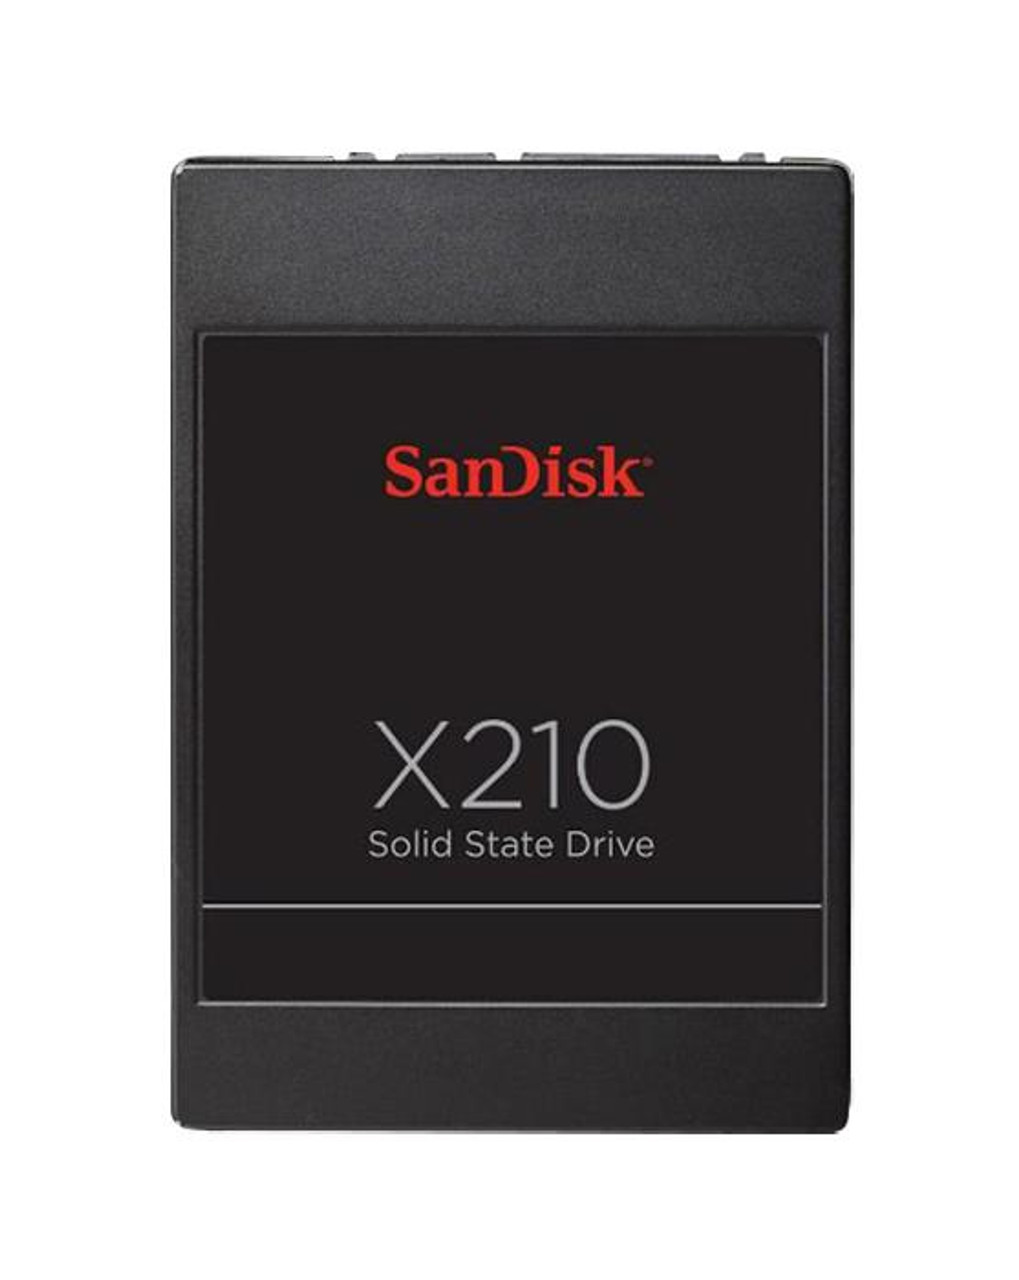 SD6SB2M-256G-1022I-A SanDisk X210 256GB MLC SATA 6Gbps 2.5-inch Internal Solid State Drive (SSD)